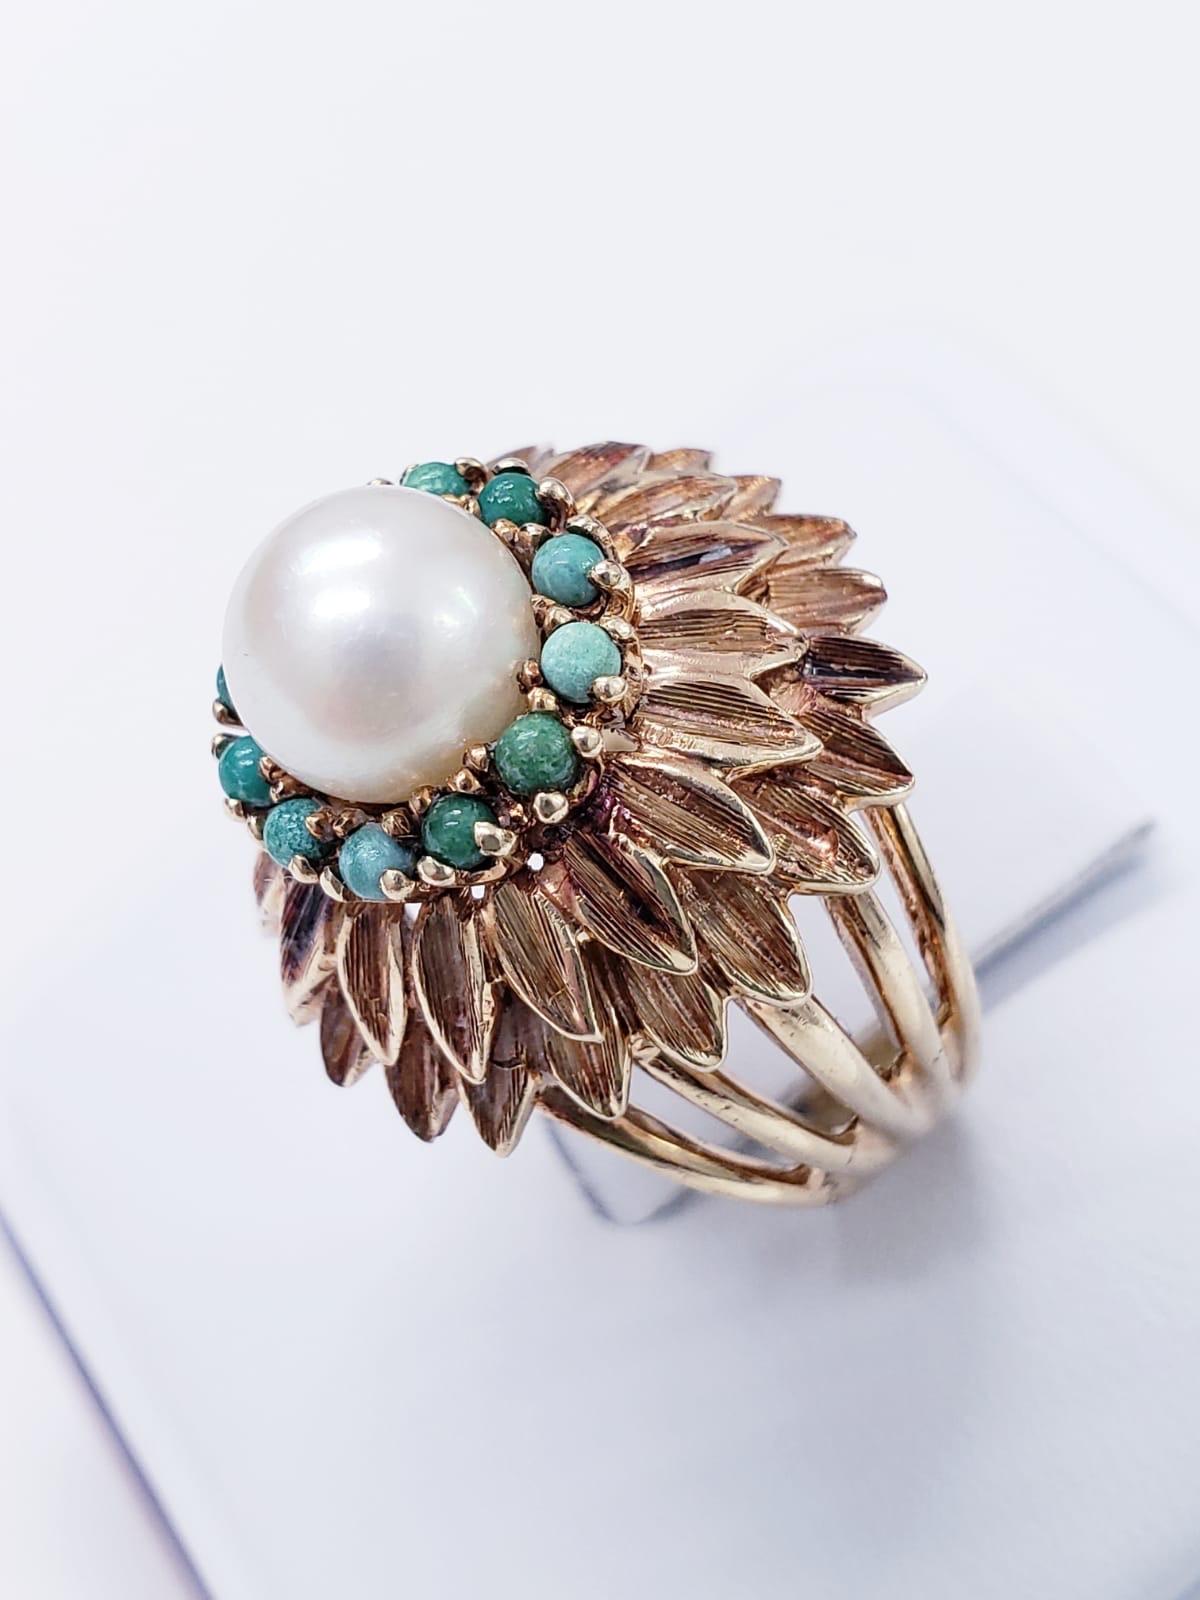 Antique Sunflower Design Pearl & Turquoise Cocktail Ring. The ring is made of 14k solid gold and featured a center pearl of 7.75mm size. The ring size is 6. The ring weights 10.5 grams.